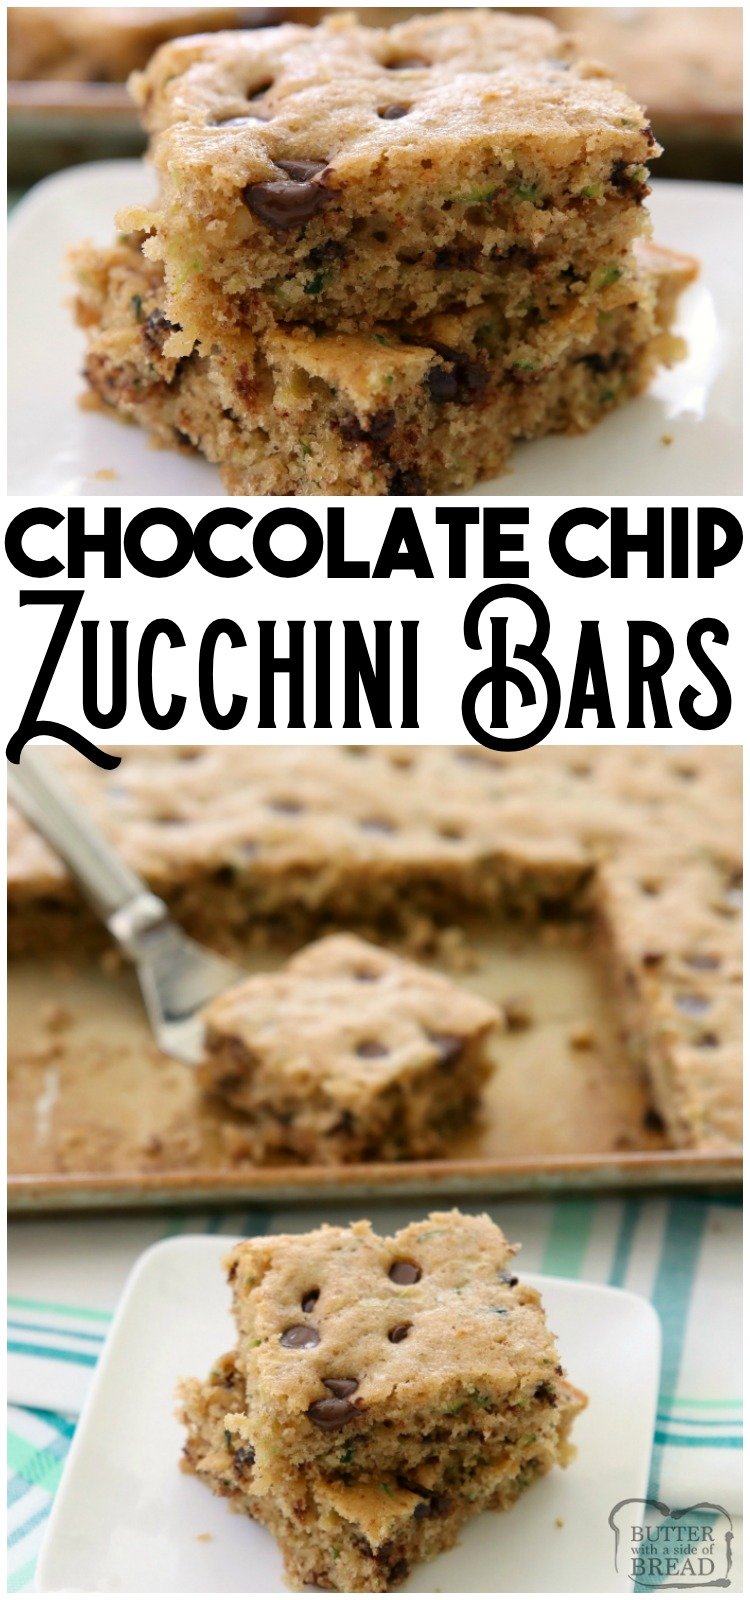 Chocolate Chip Zucchini Bars made with ripe zucchini and has all the zucchini bread flavors! One of my favorite easy zucchini recipes; these bars are a real crowd pleaser! #zucchini #quickbread #cake #baking #chocolatechip #recipe #snack from BUTTER WITH A SIDE OF BREAD